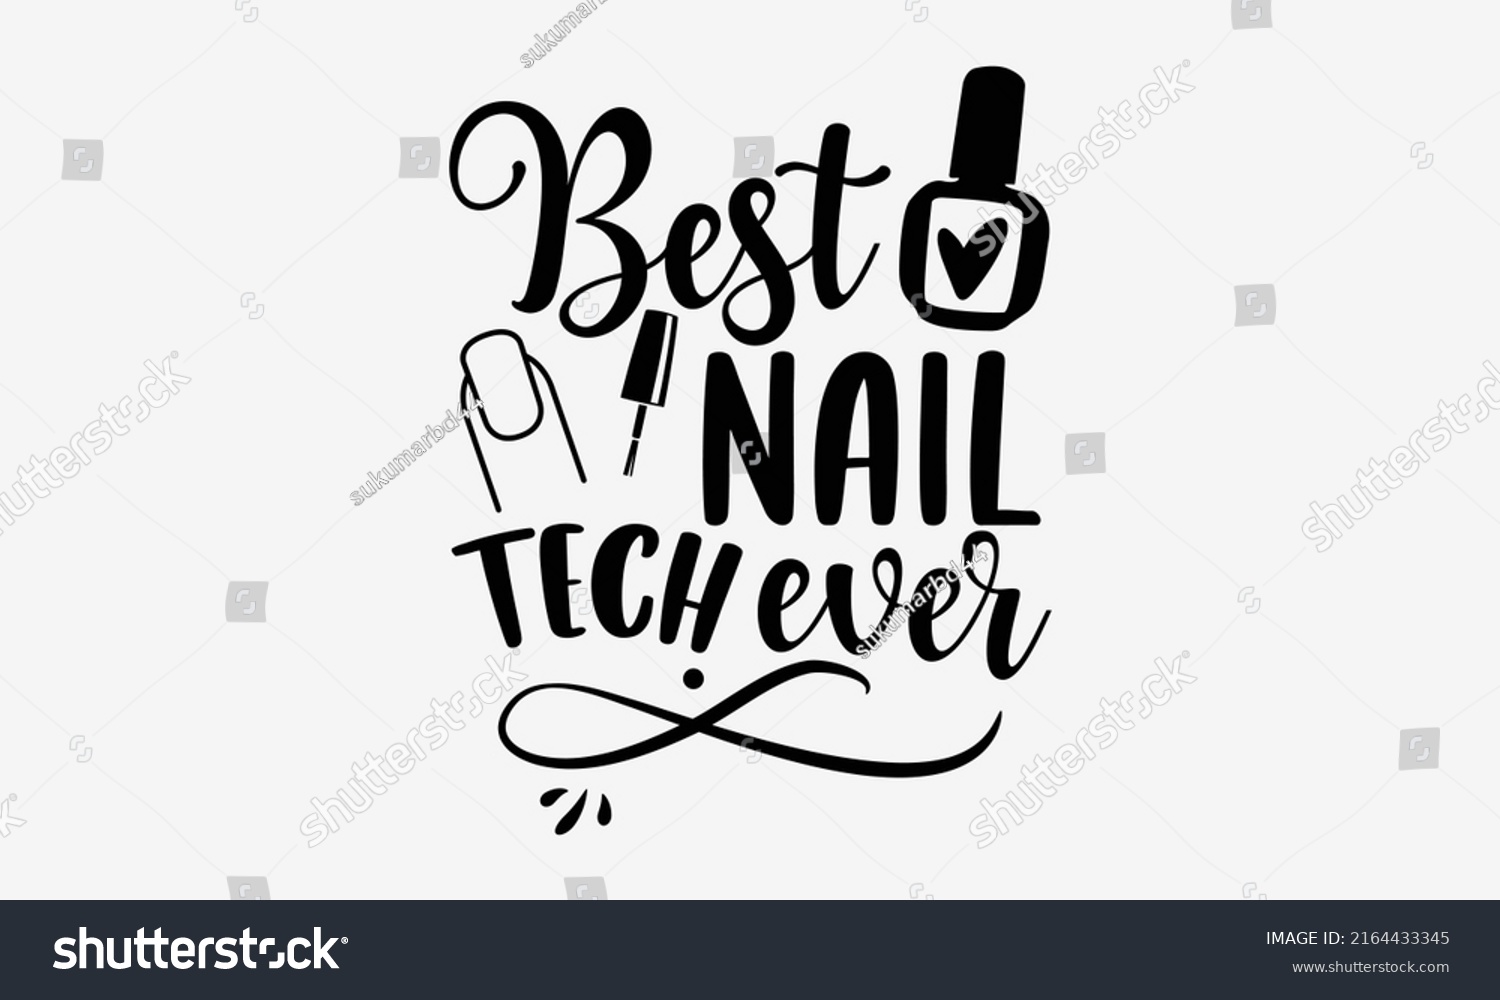 SVG of Best nail tech ever - Nail Tech  t shirt design, Hand drawn lettering phrase, Calligraphy graphic design, SVG Files for Cutting Cricut and Silhouette  svg